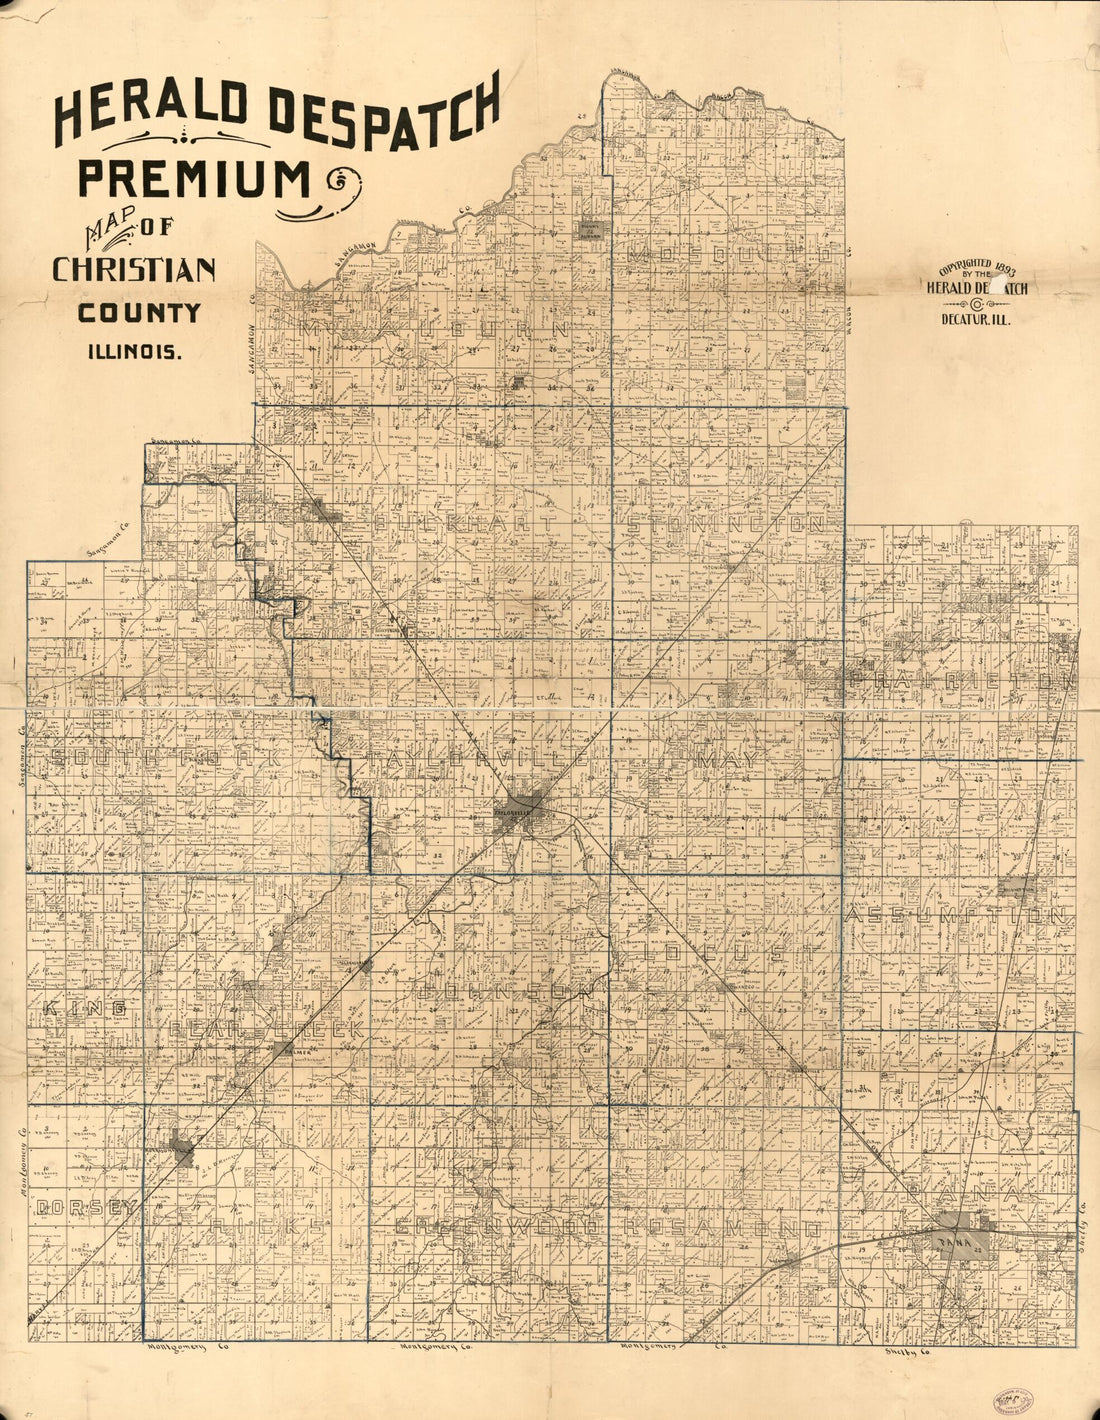 This old map of Herald Despatch Premium Map of Christian County, Illinois from 1893 was created by  Herald Despatch Co in 1893